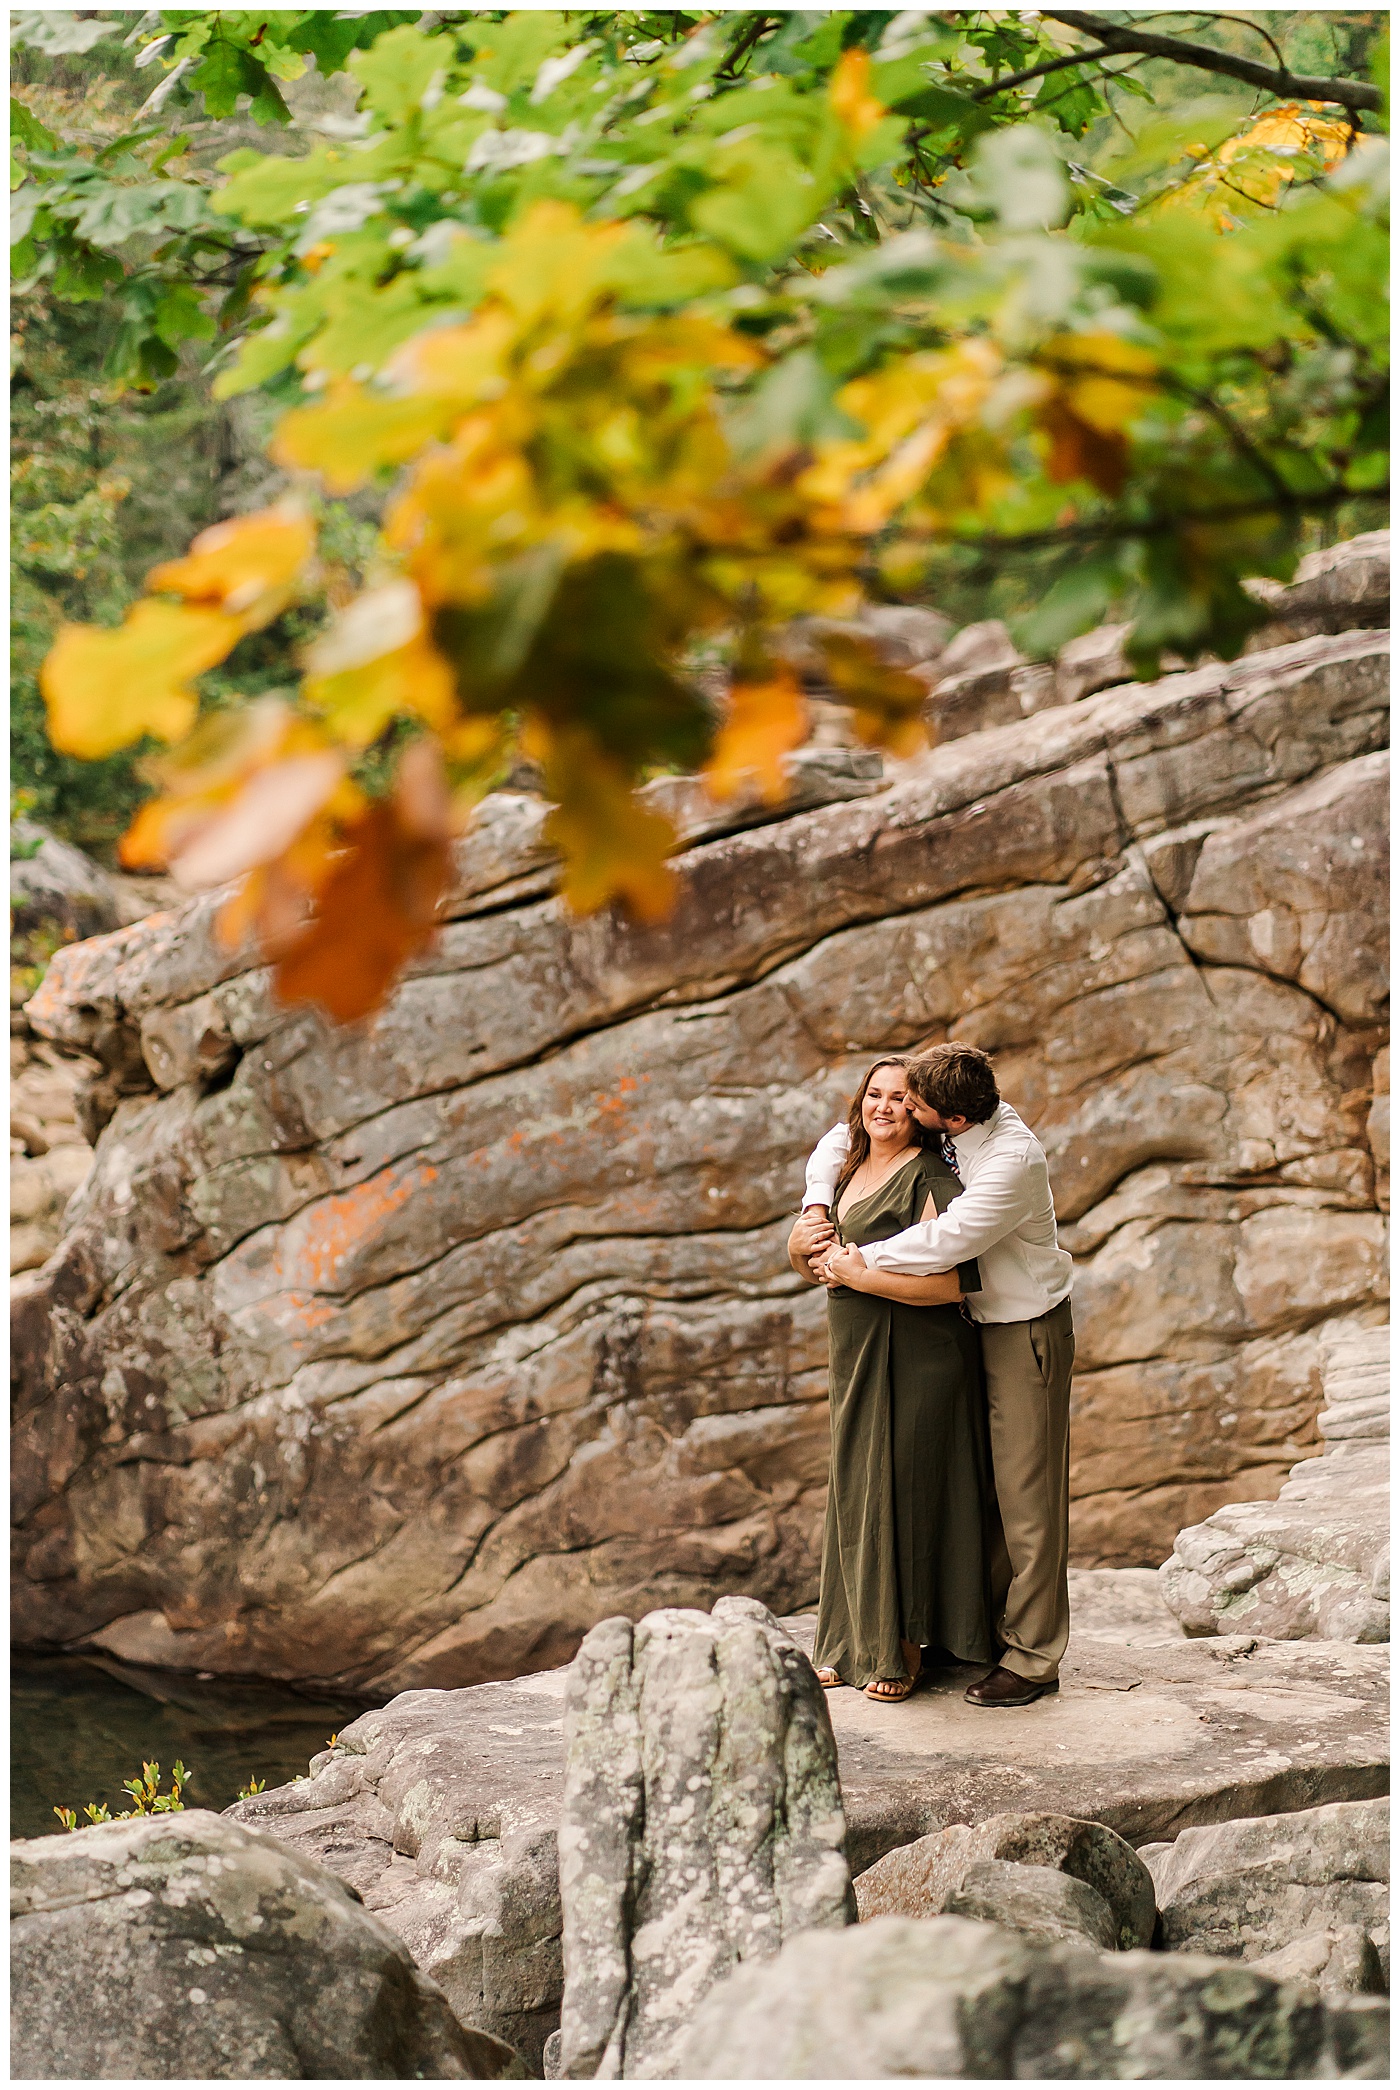 Chattanooga Fall Engagement Photos the Kissing Couple